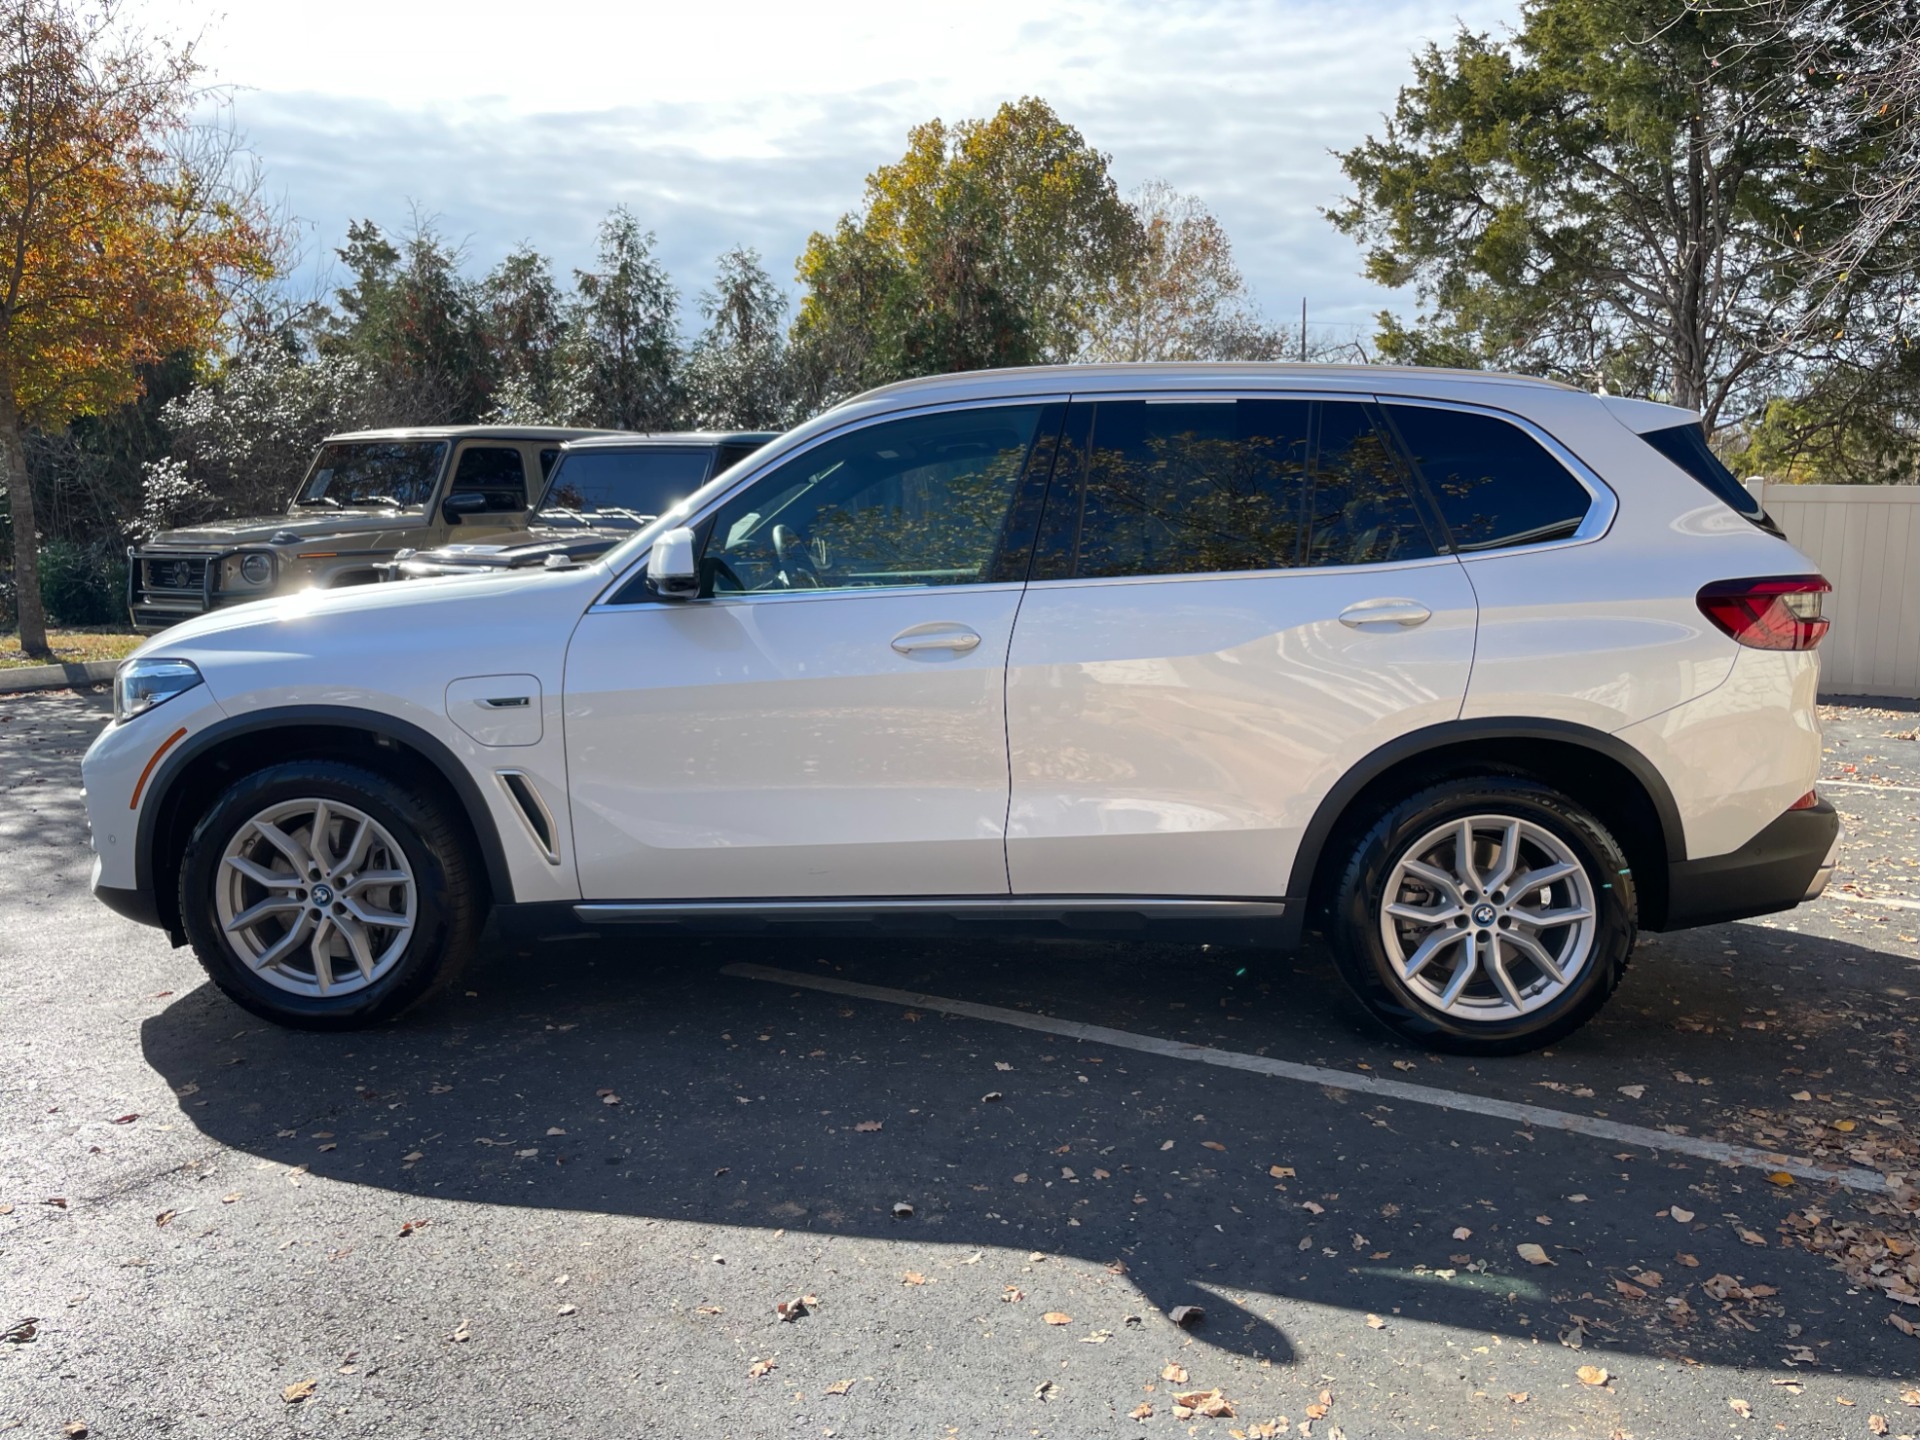 2022 Used BMW X5 xDrive45e Plug-In Hybrid at Elite Auto Brokers